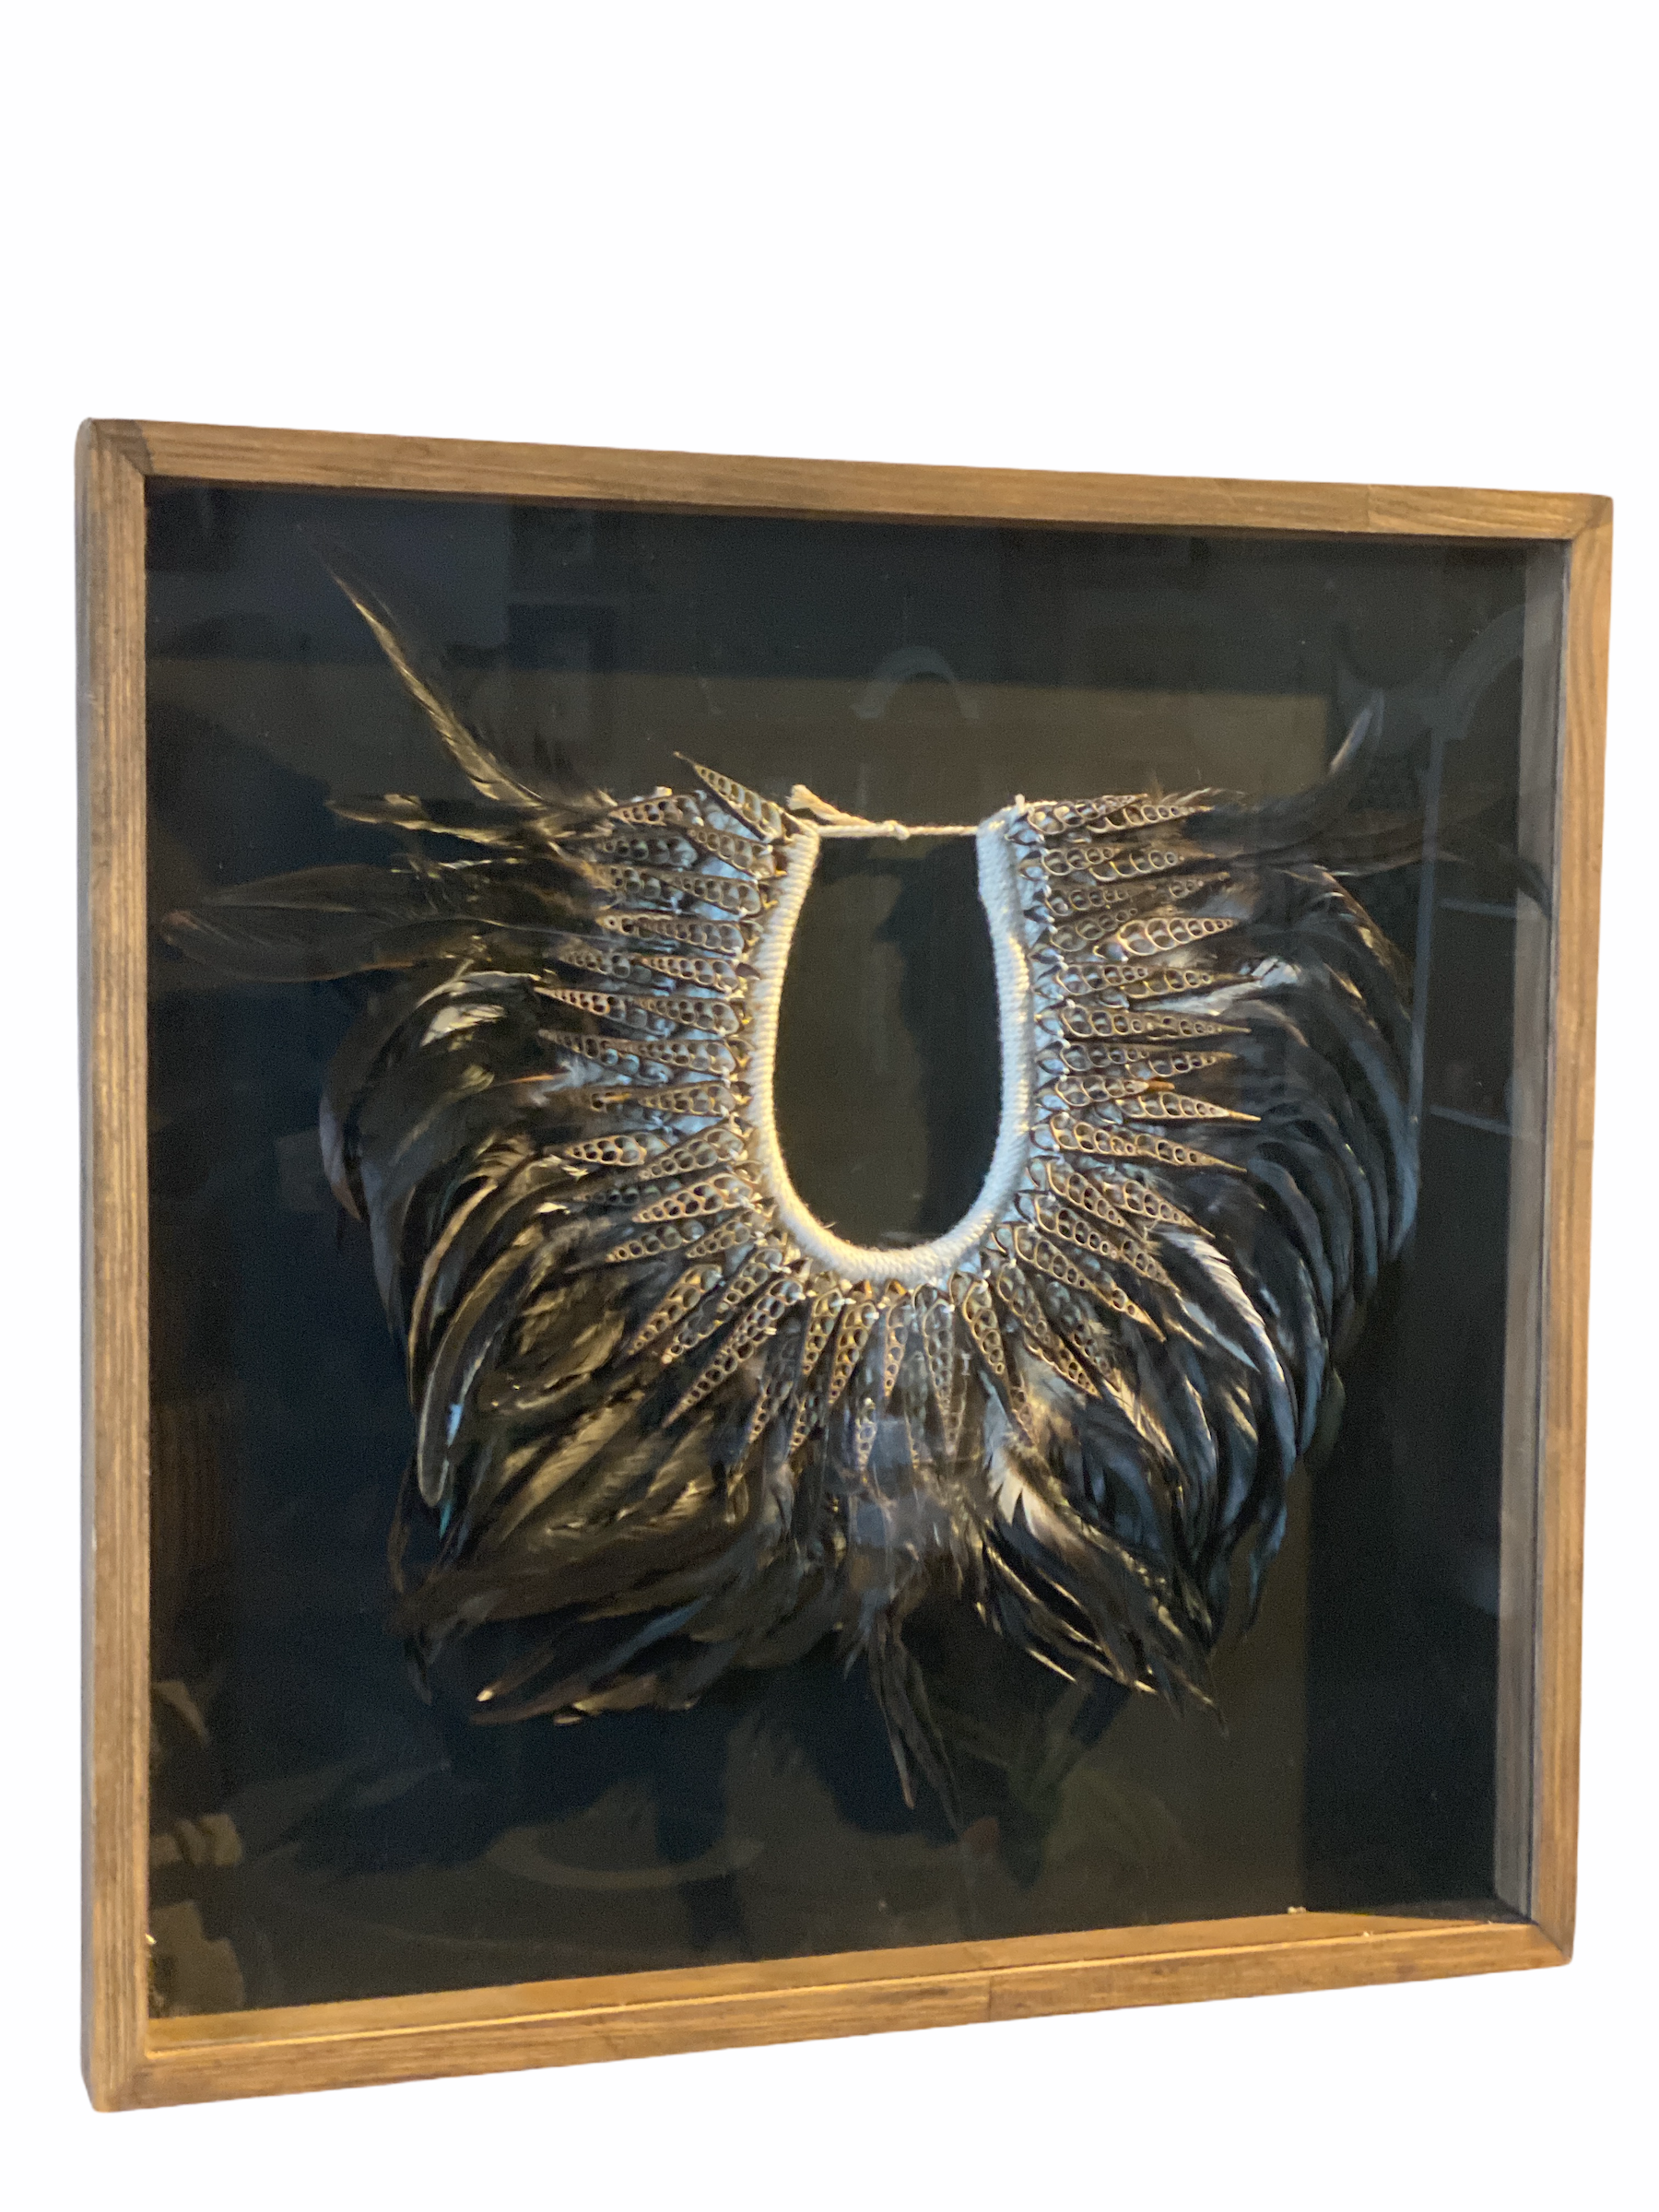 Handmade framed Feather & Shell necklace